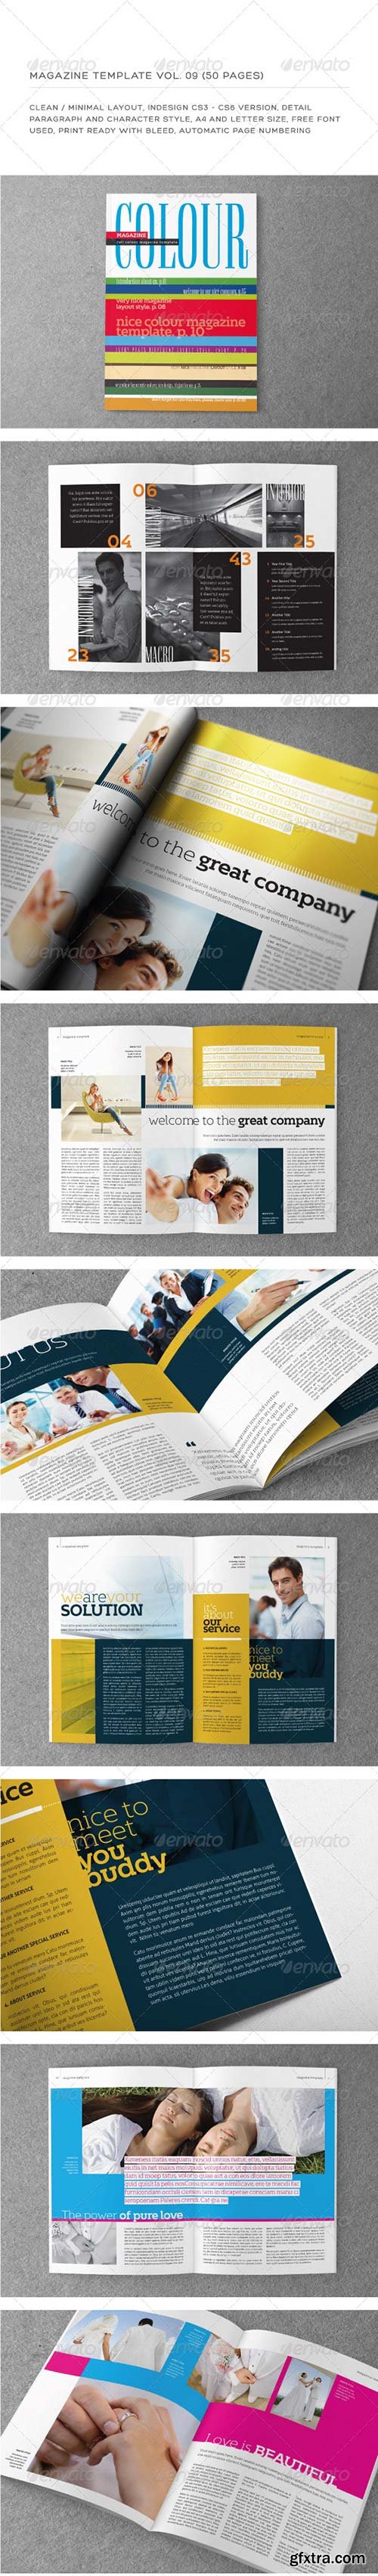 GraphicRiver - InDesign Magazine Template Vol. 09 (50 pages)